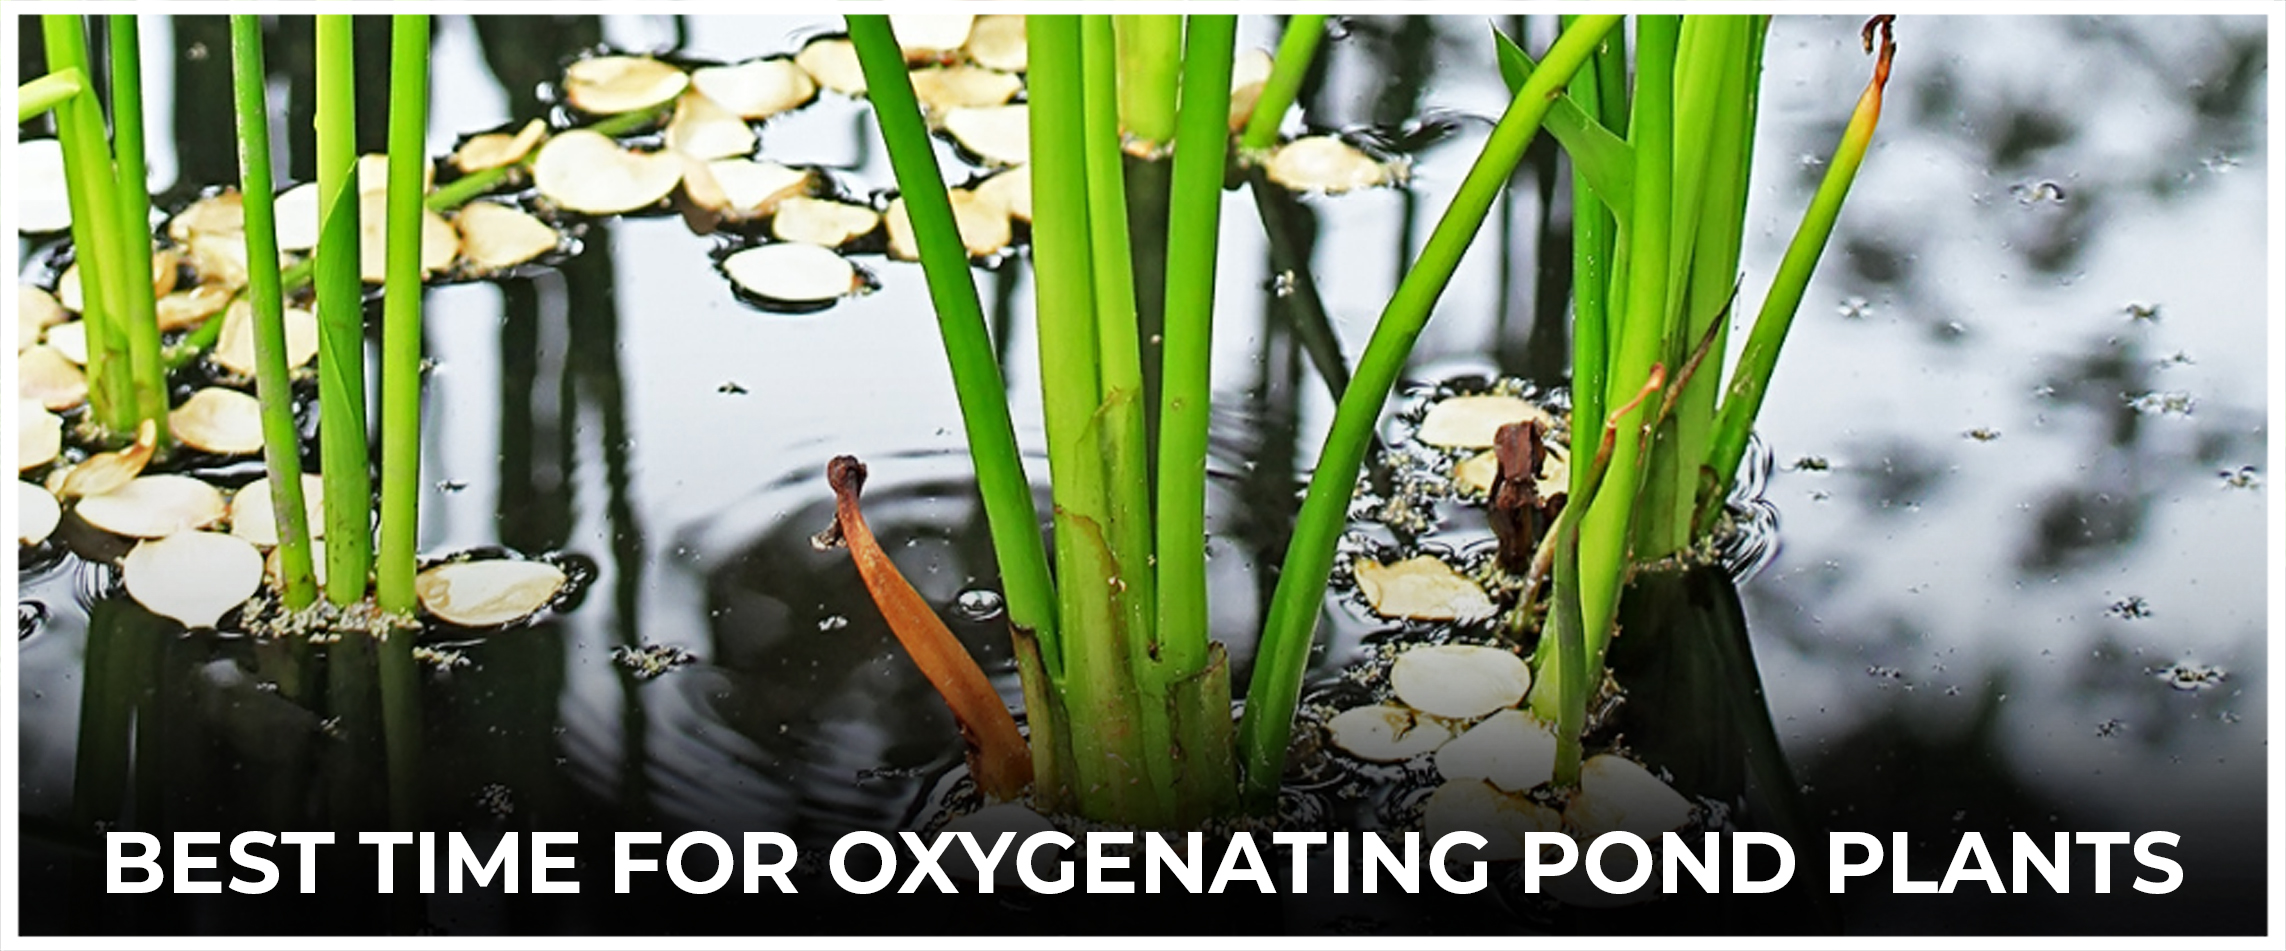 Best Time For Oxygenating Pond Plants